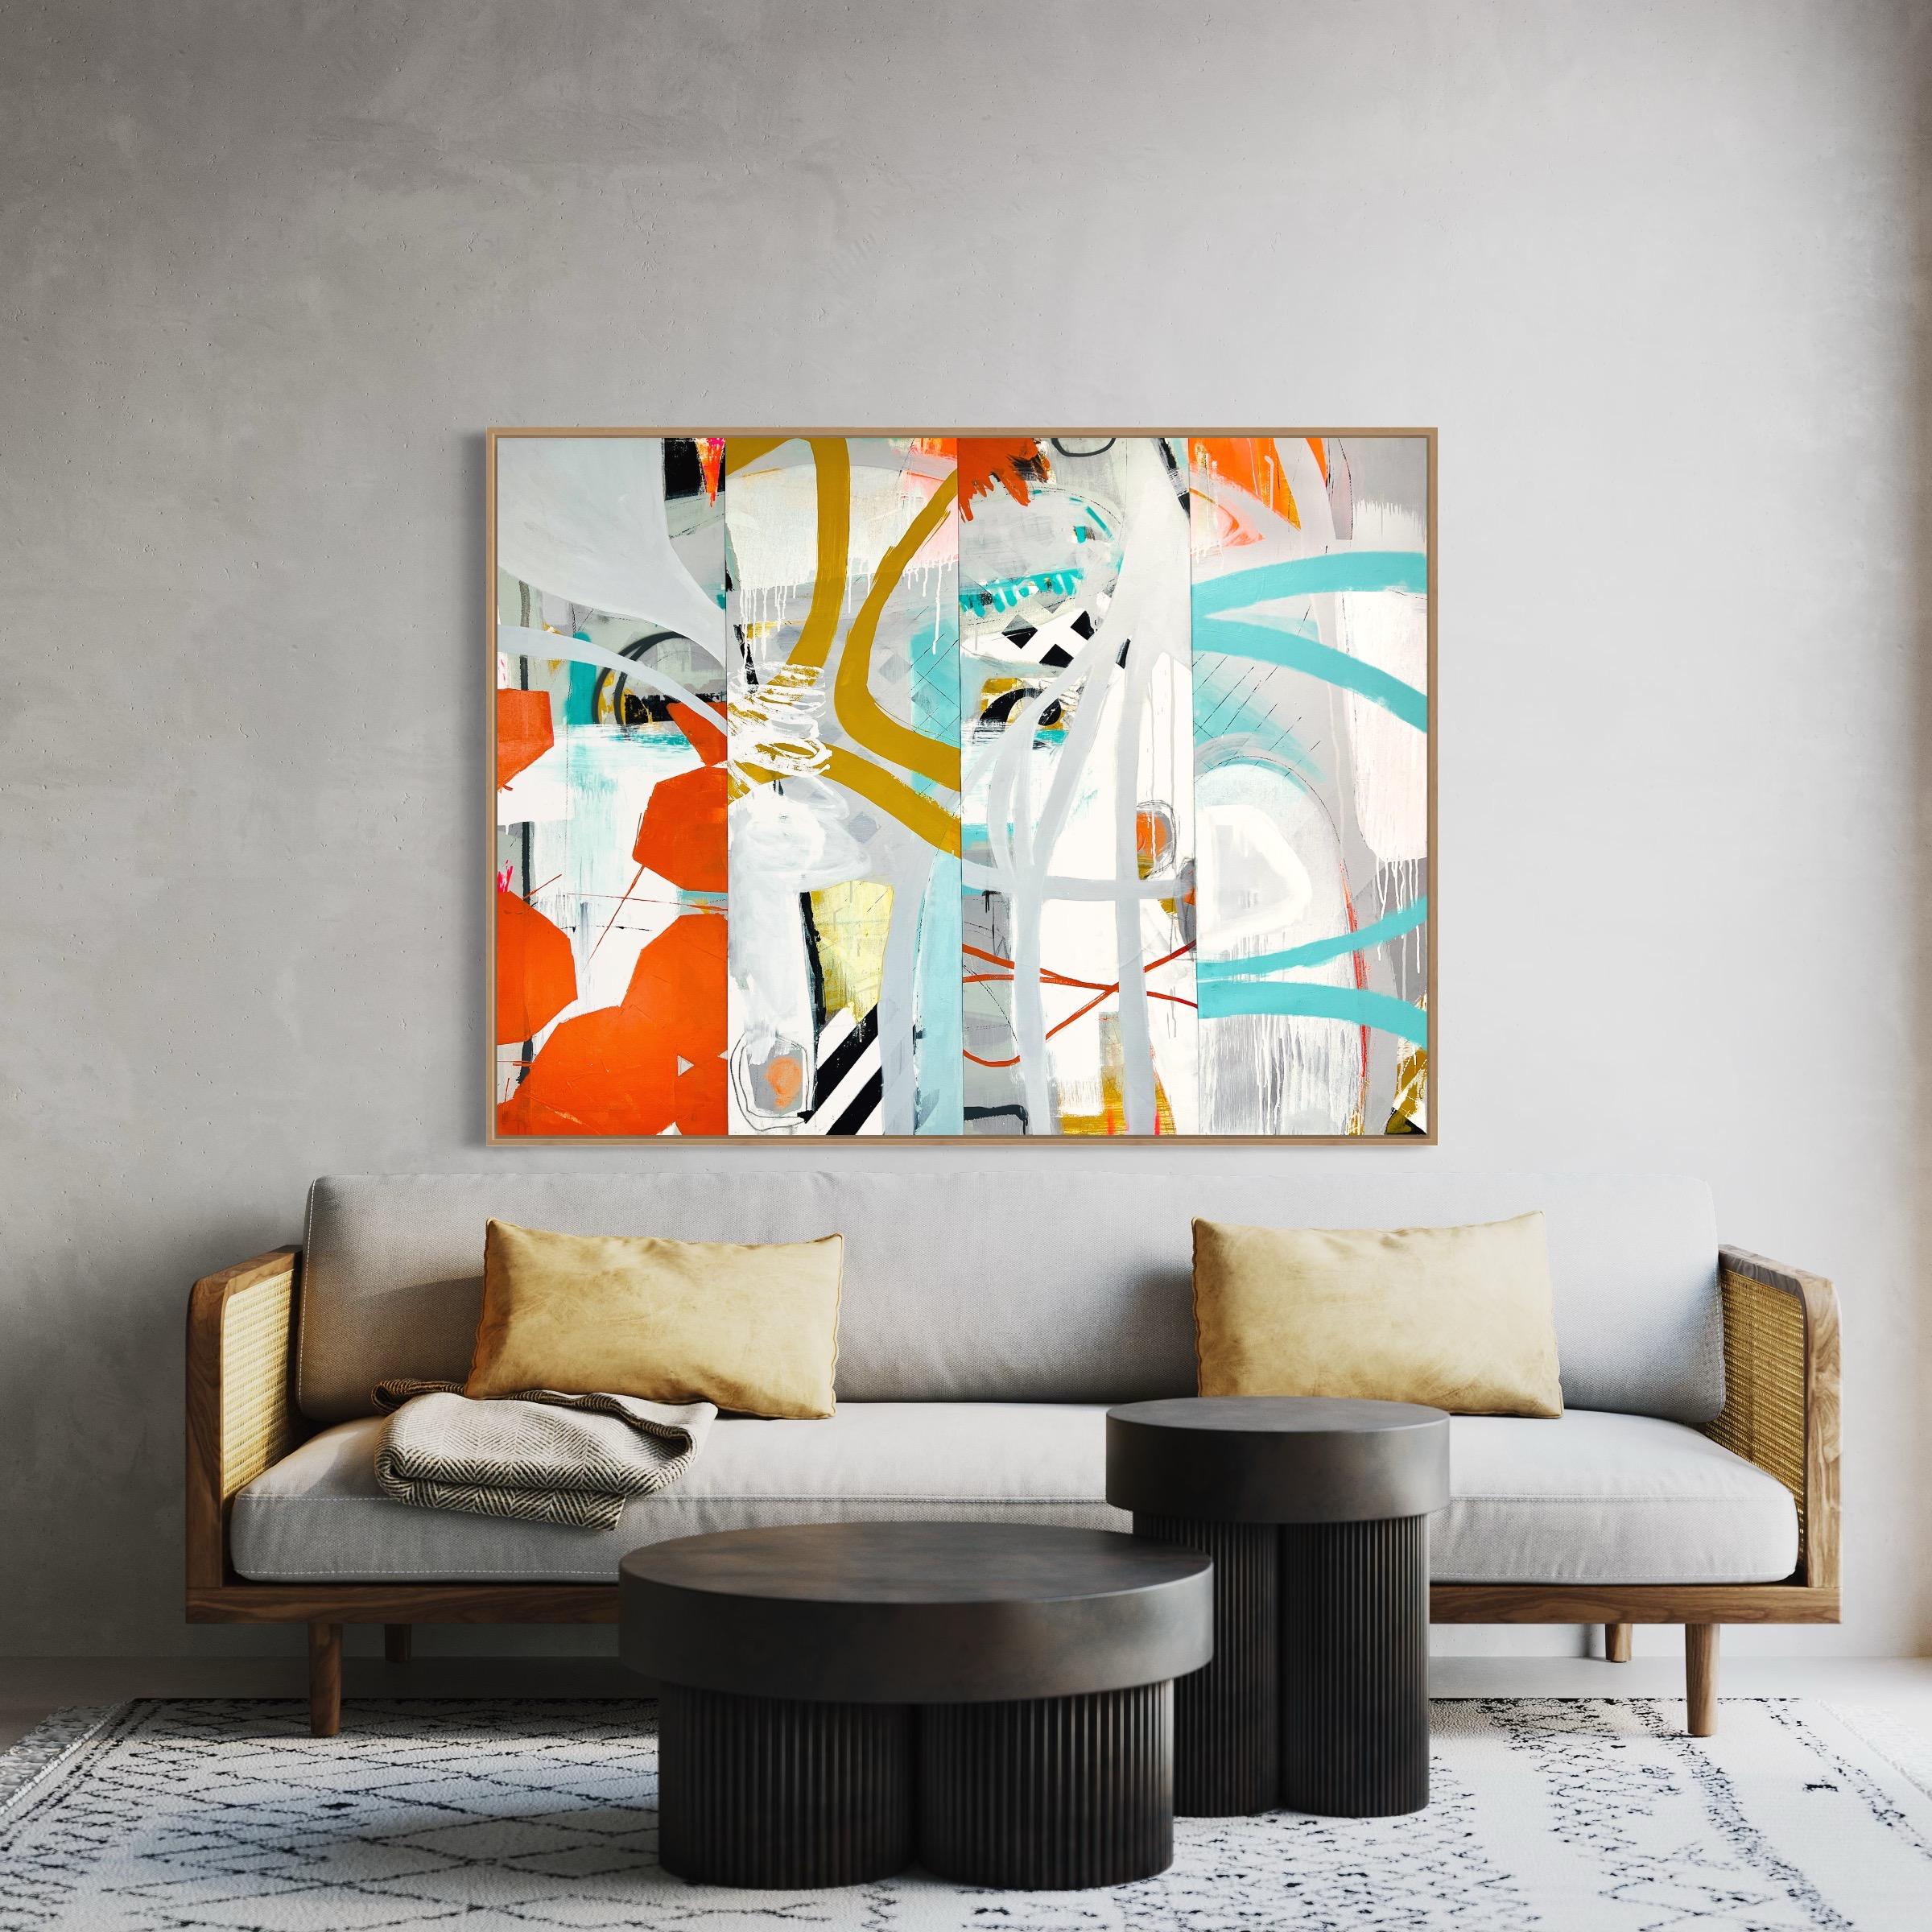 Poppy Stitch, Original Contemporary Bright Abstract Patterned Collage Painting - Gray Abstract Painting by Sarah Finucane